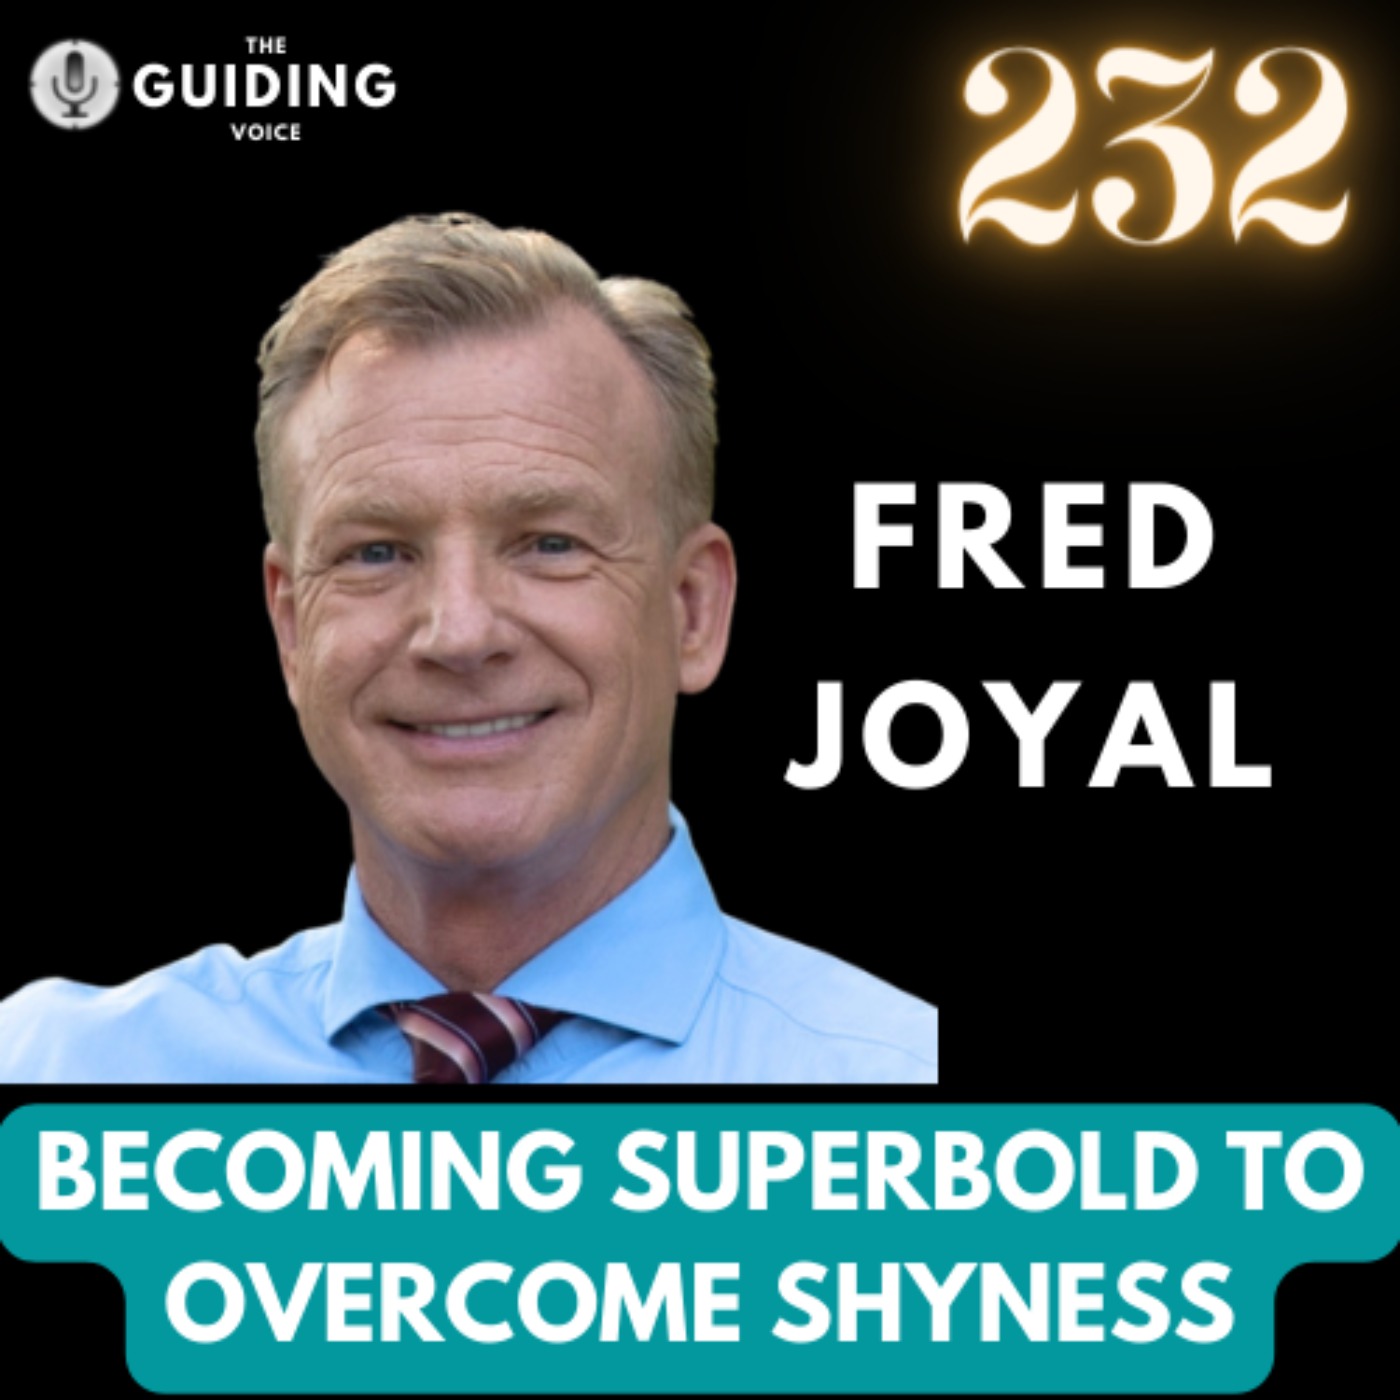 Overcoming shyness to become superbold and super rich | Fred Joyal | #TGV232